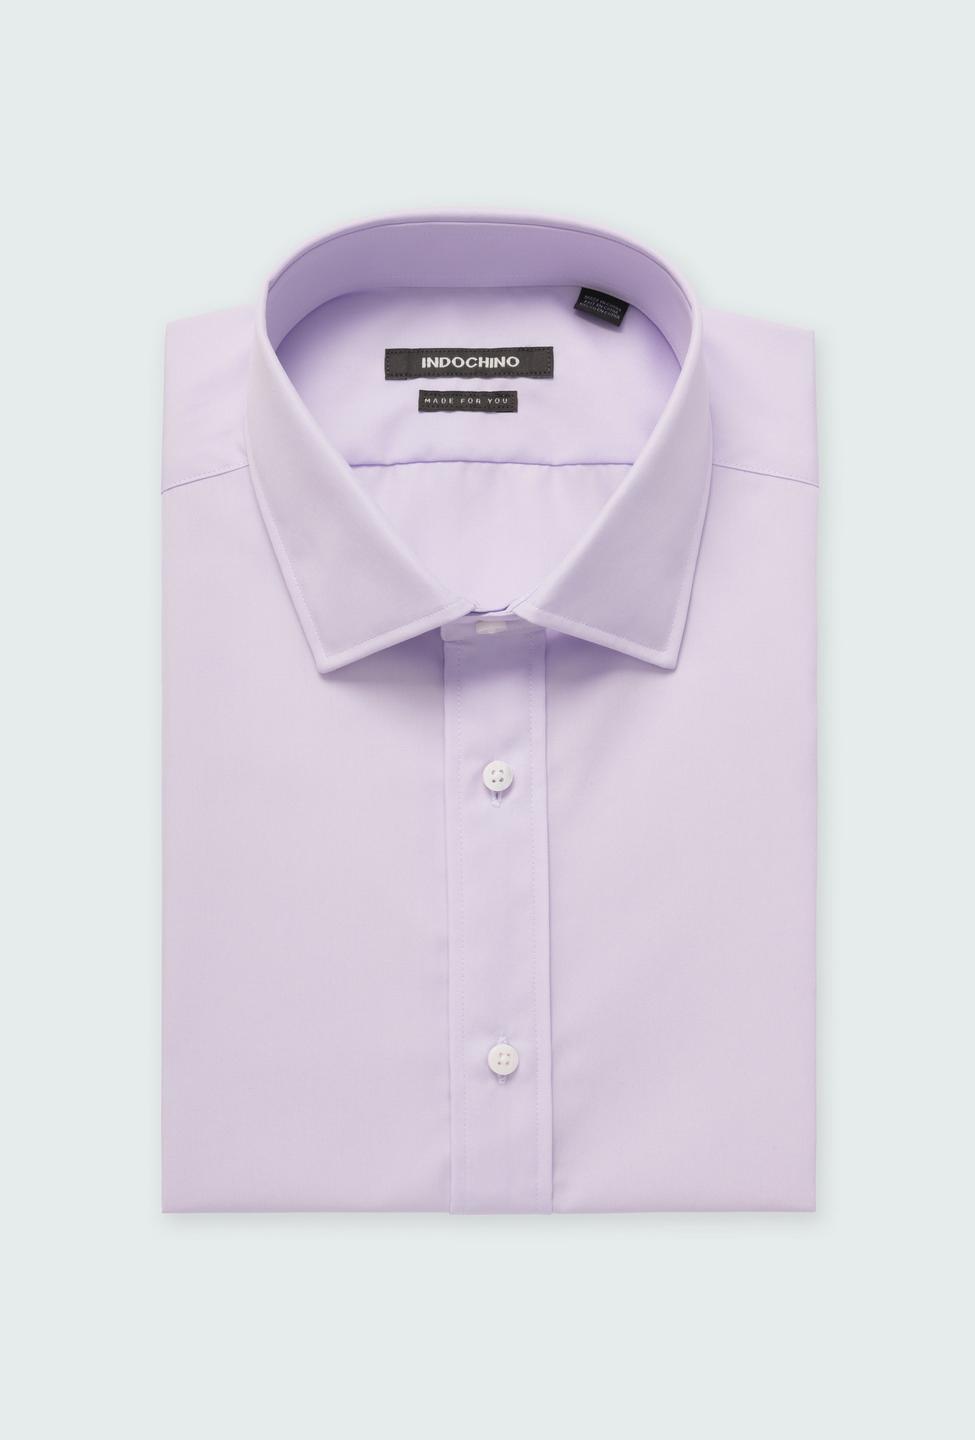 Purple shirt - Helston Solid Design from Premium Indochino Collection